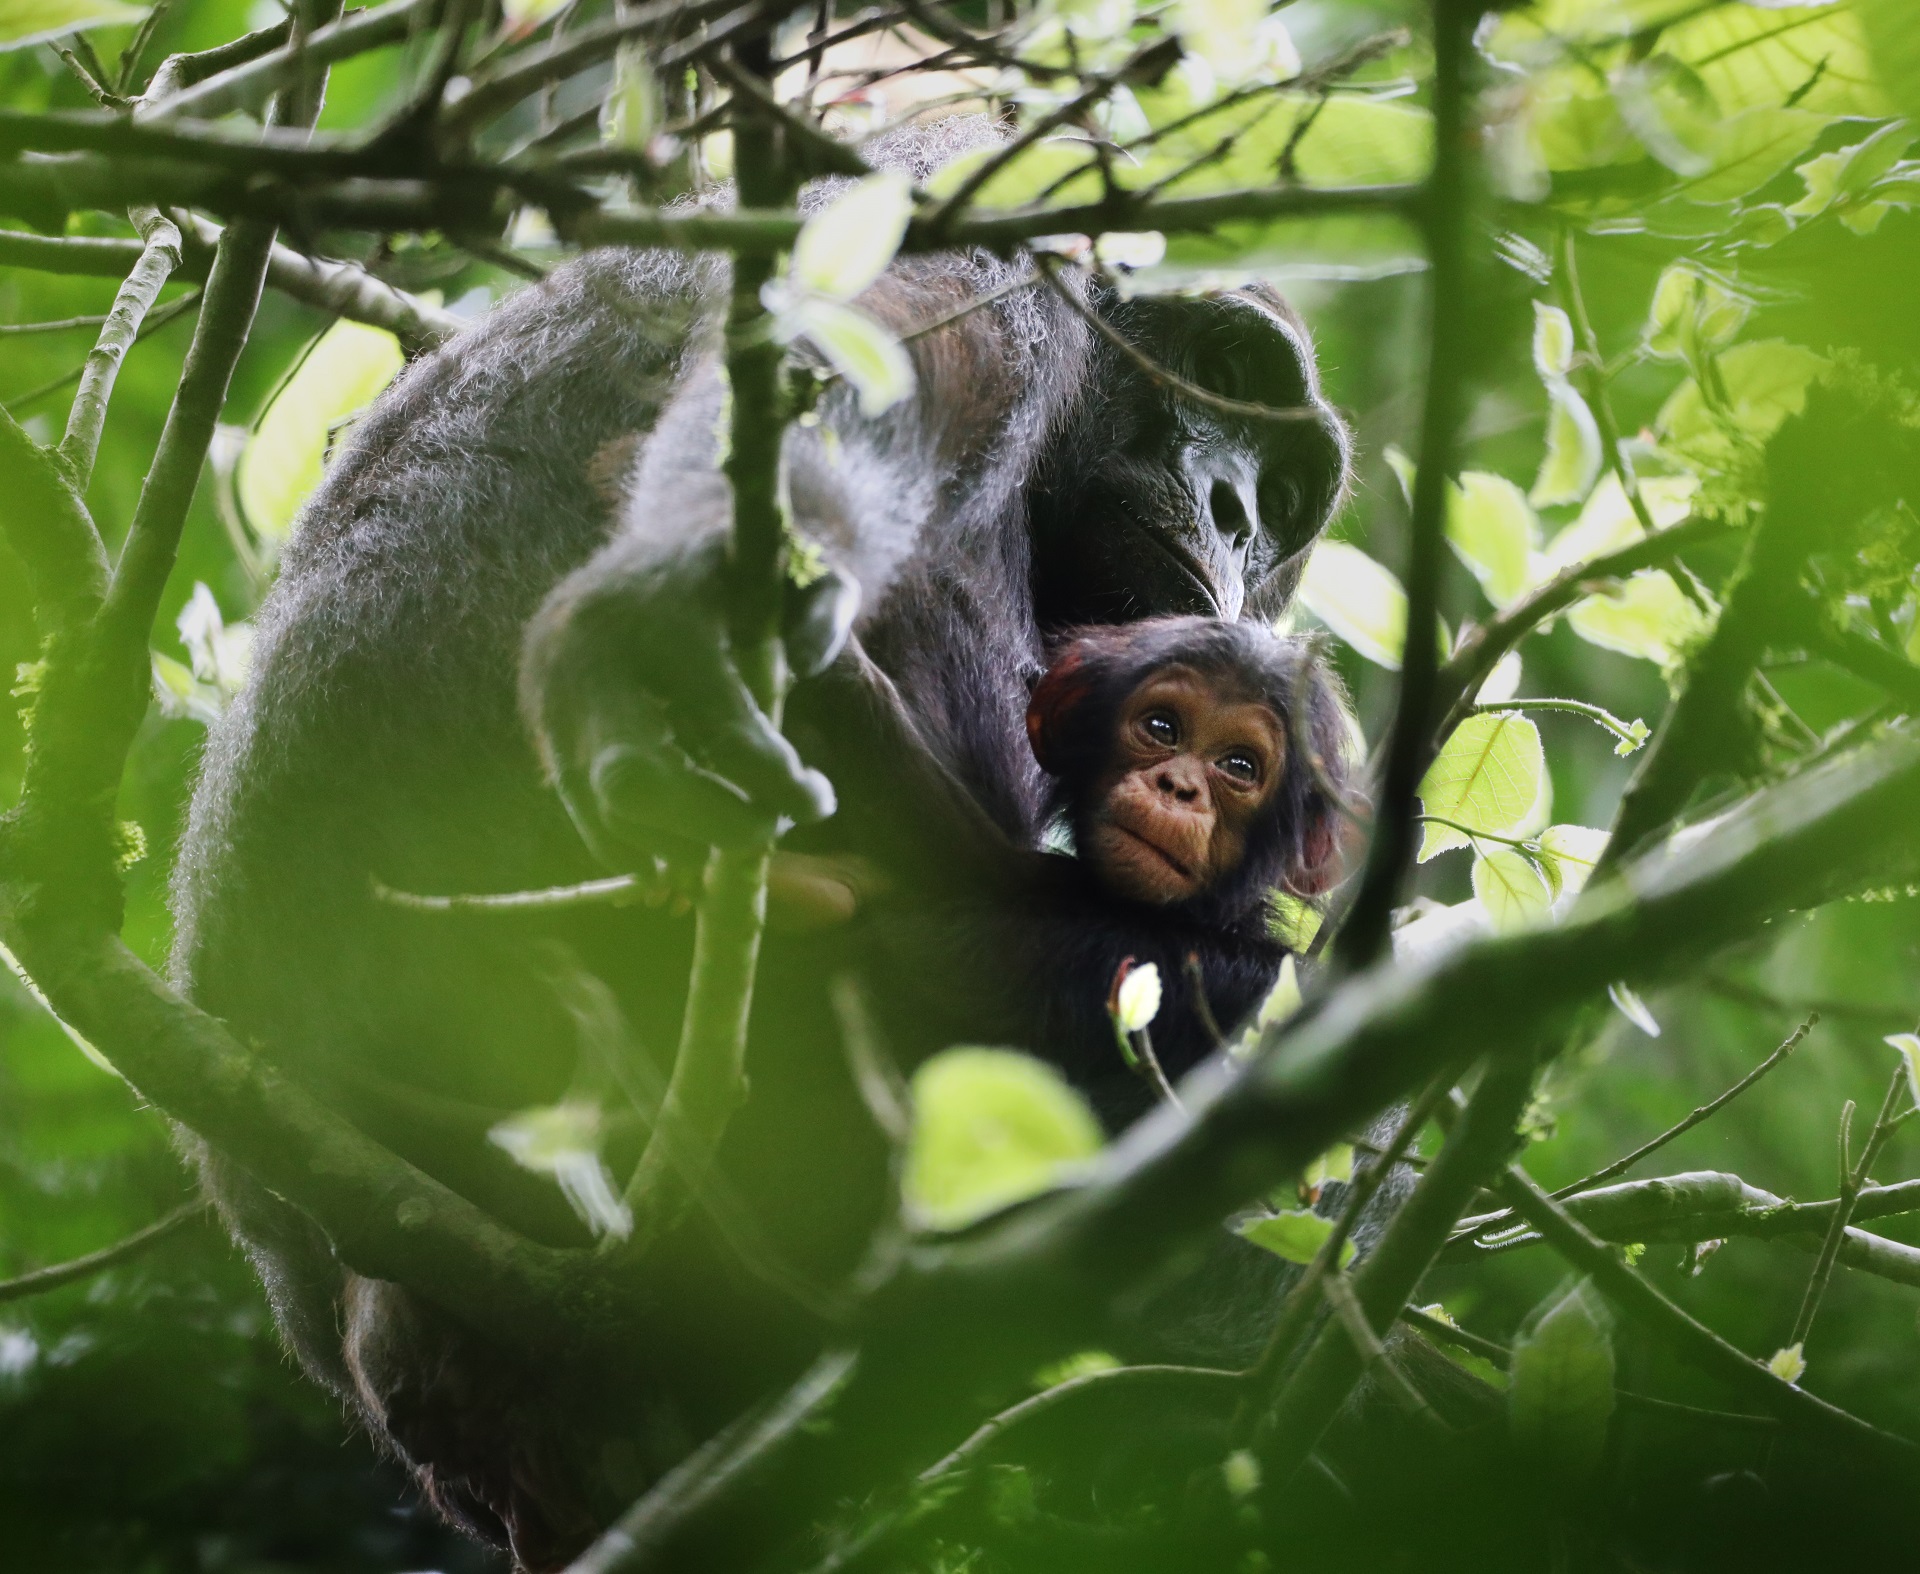 Chimpanzee Deli and her baby up in a tree partially obscured by leaves Image: LAURA DANIELS 2023